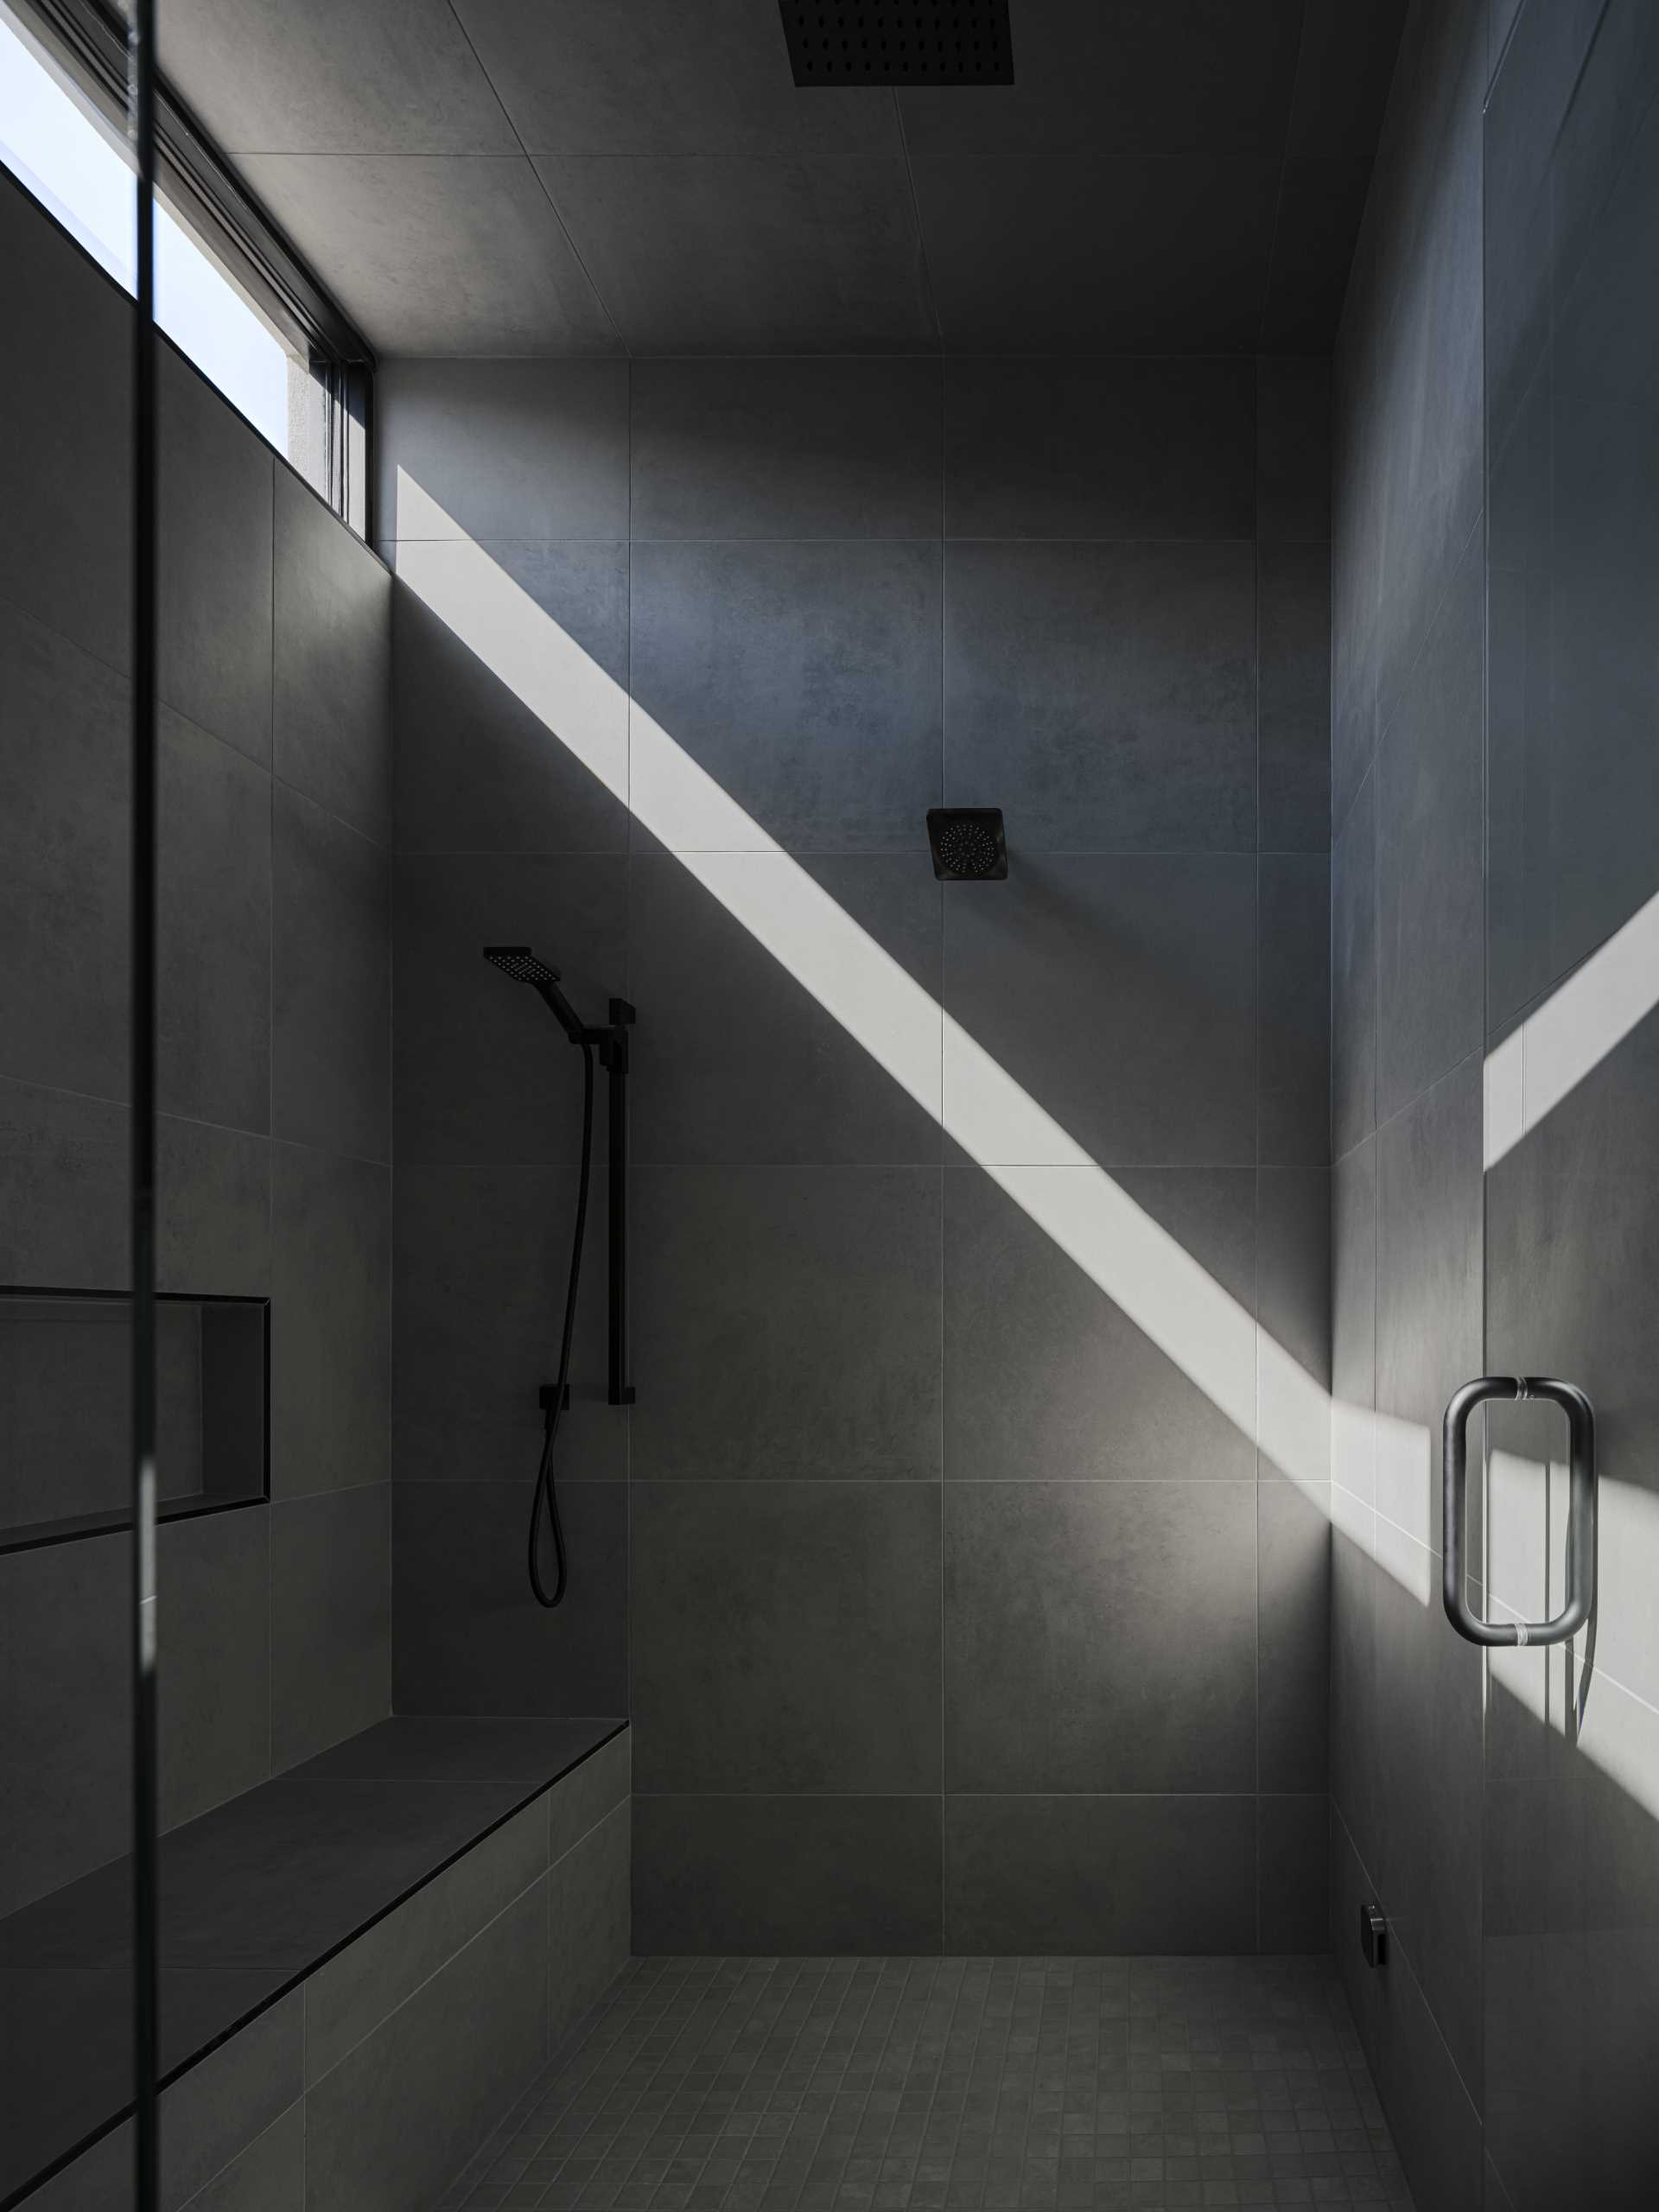 In this dark grey shower, the walls, ceiling, and bench are covered in large tiles, while a horizontal window provides a streak of sunlight.